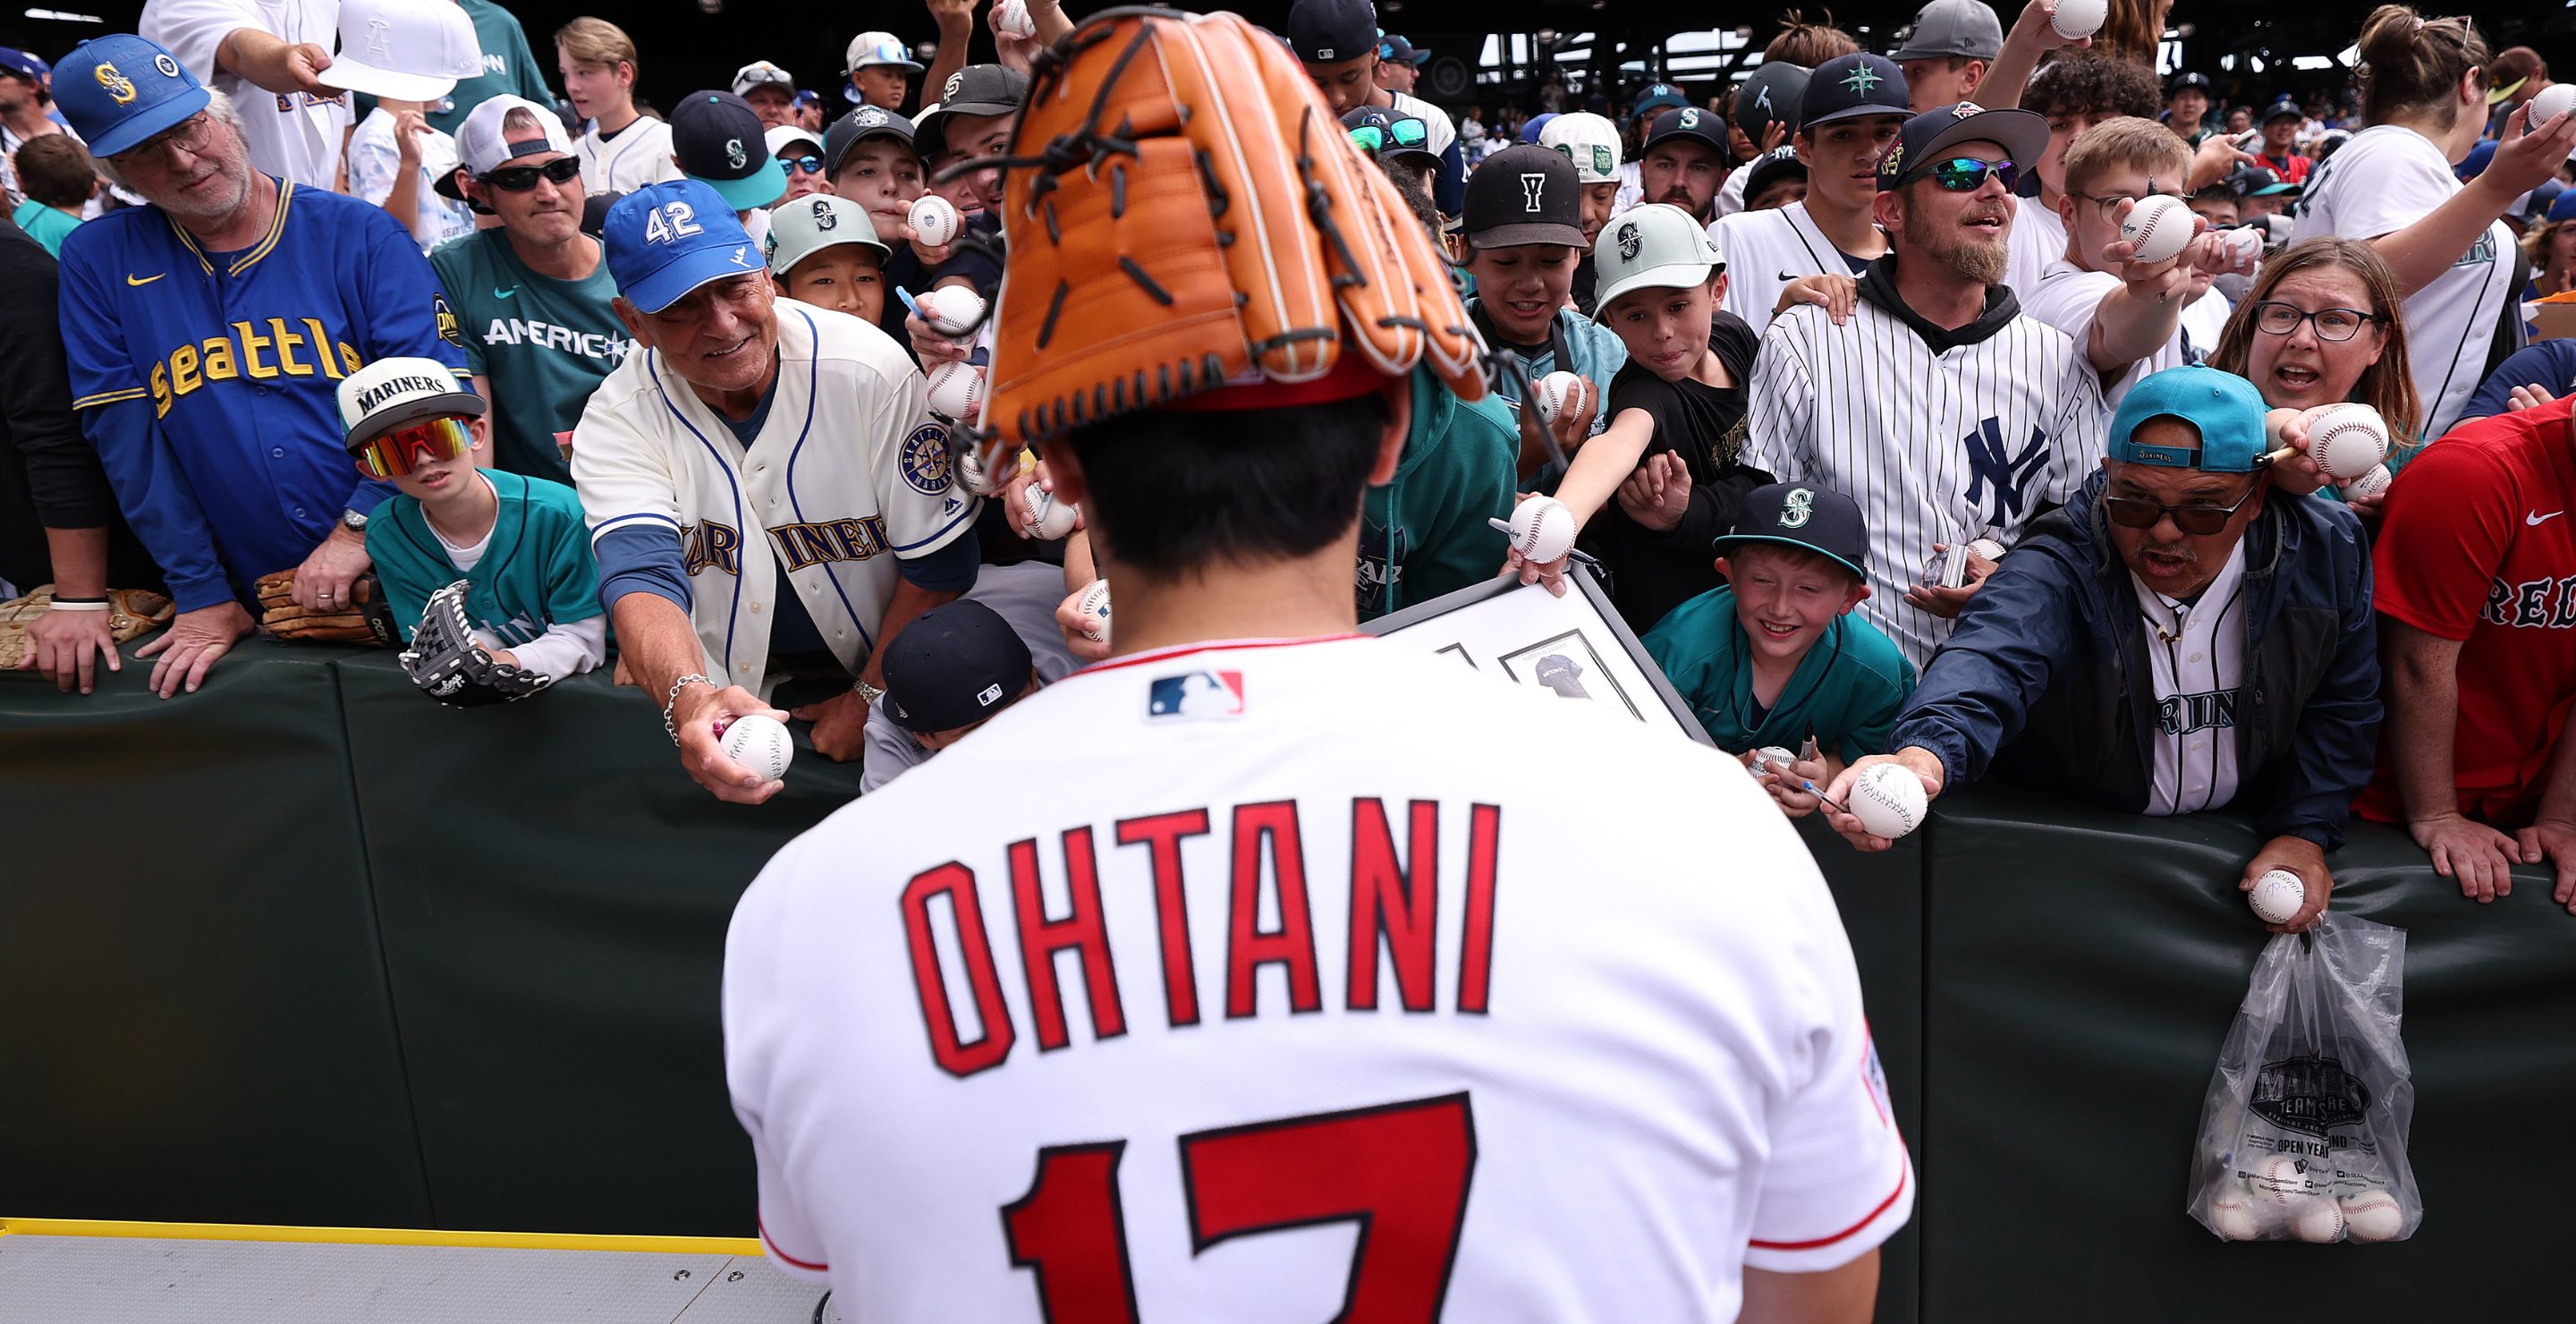 MLB Jersey Sales Acuña, Not Ohtani, Tops List of 20 Best Sellers